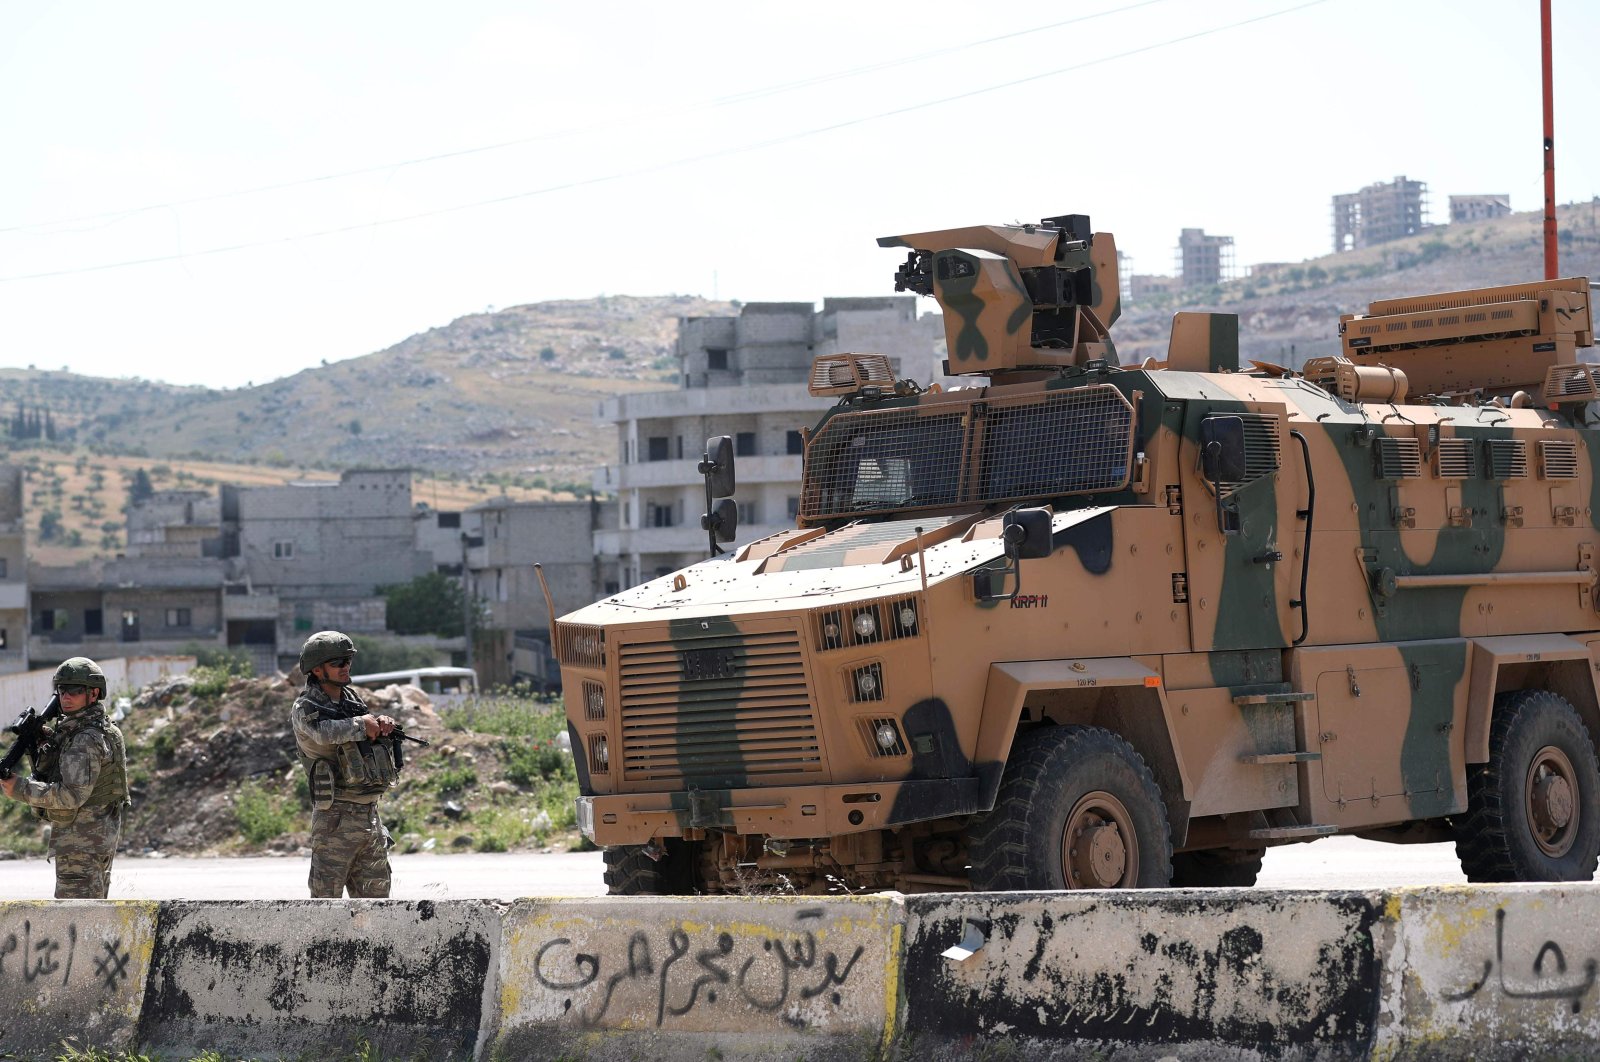 Turkish troops stand next to one of their armoured vehicles as they secure the road on the M4 highway between Saraqeb and Ariha in Syria's Idlib province, May 7, 2020. (AFP)